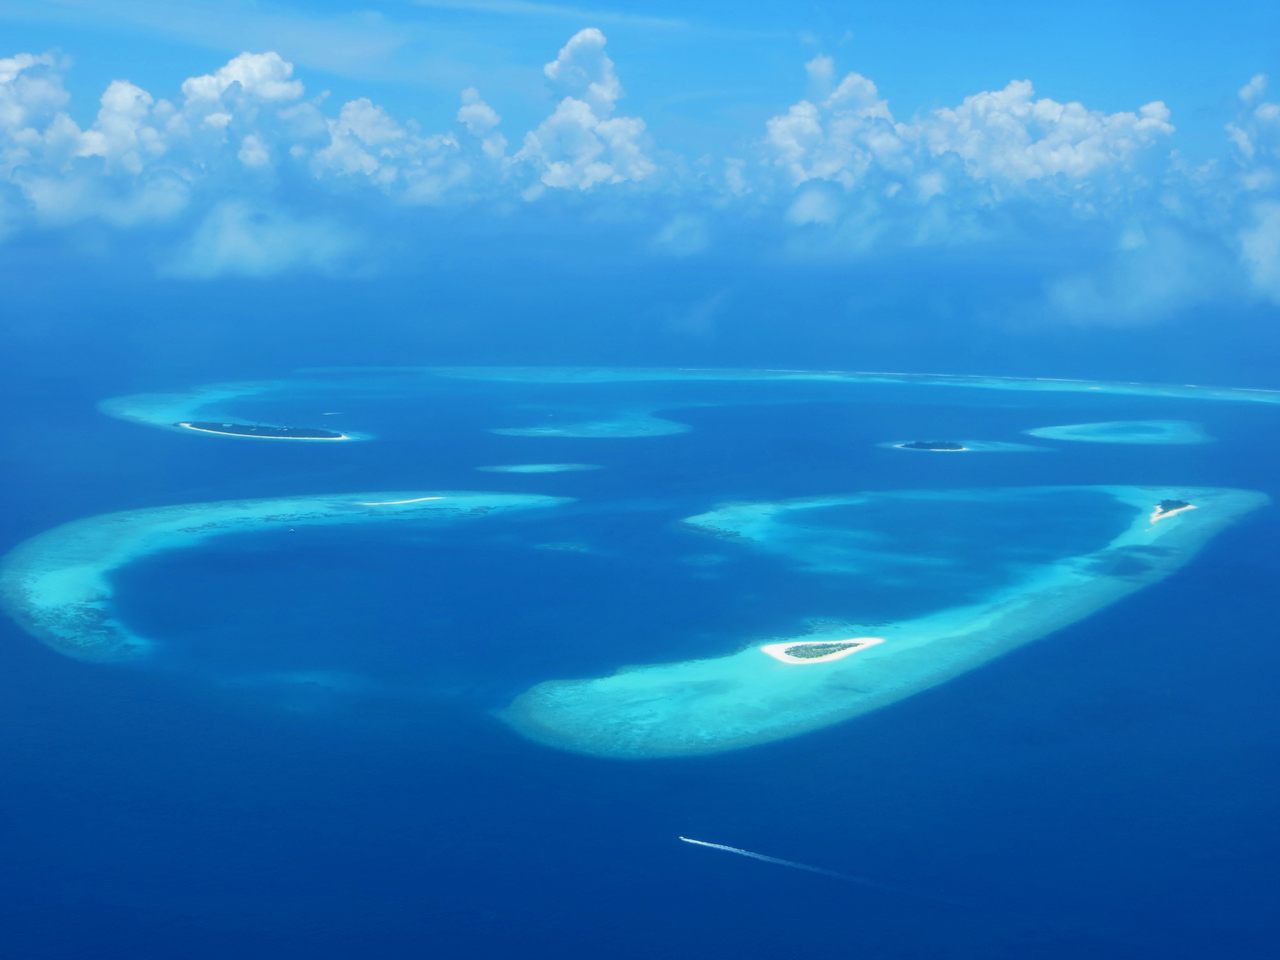 An aerial image of Baa Atoll in the Maldives, a coral island group not far from Kaashidhoo.